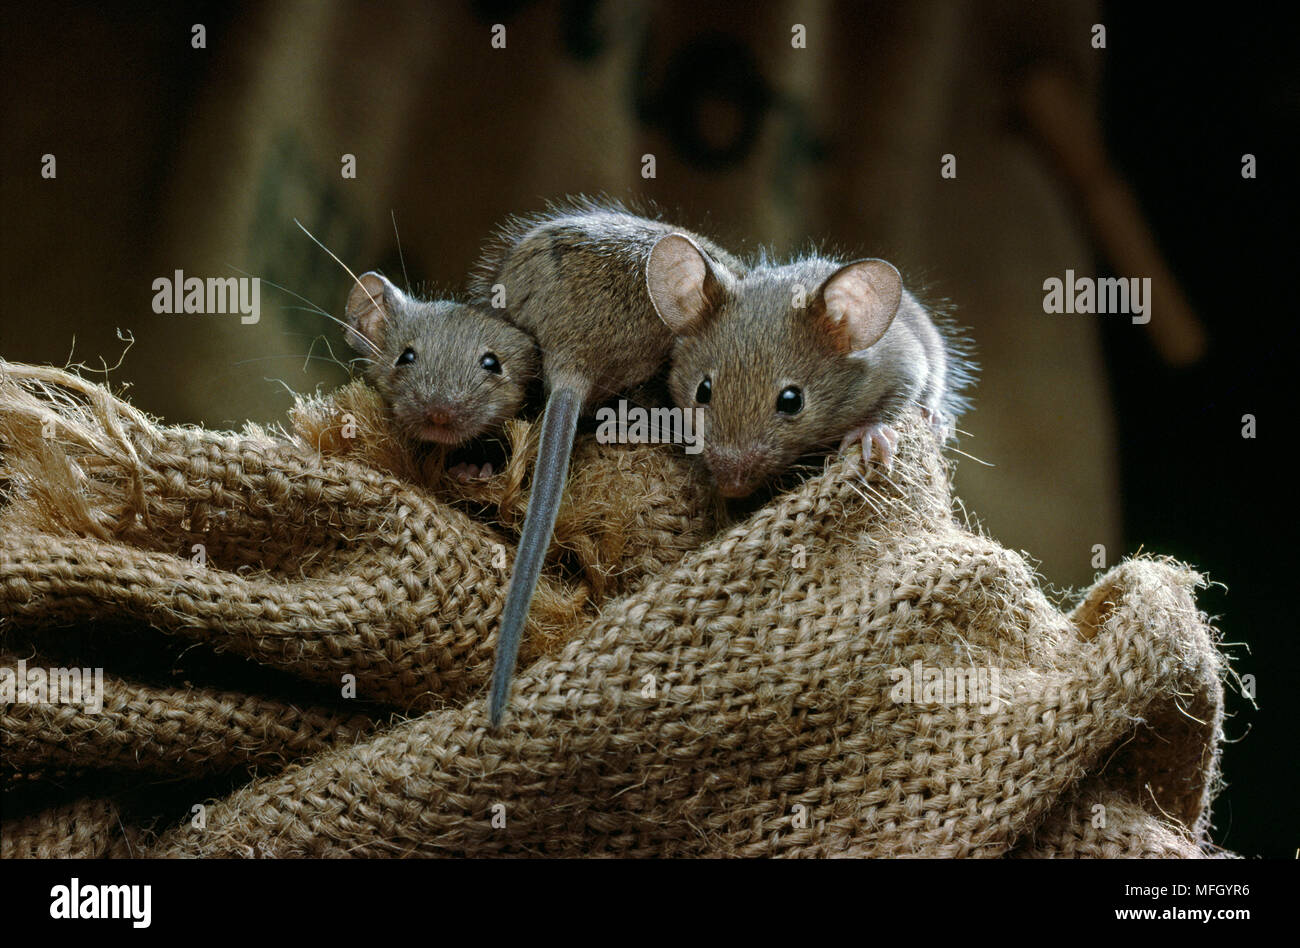 HOUSE MOUSE  Mus musculus three juveniles on sacking Stock Photo